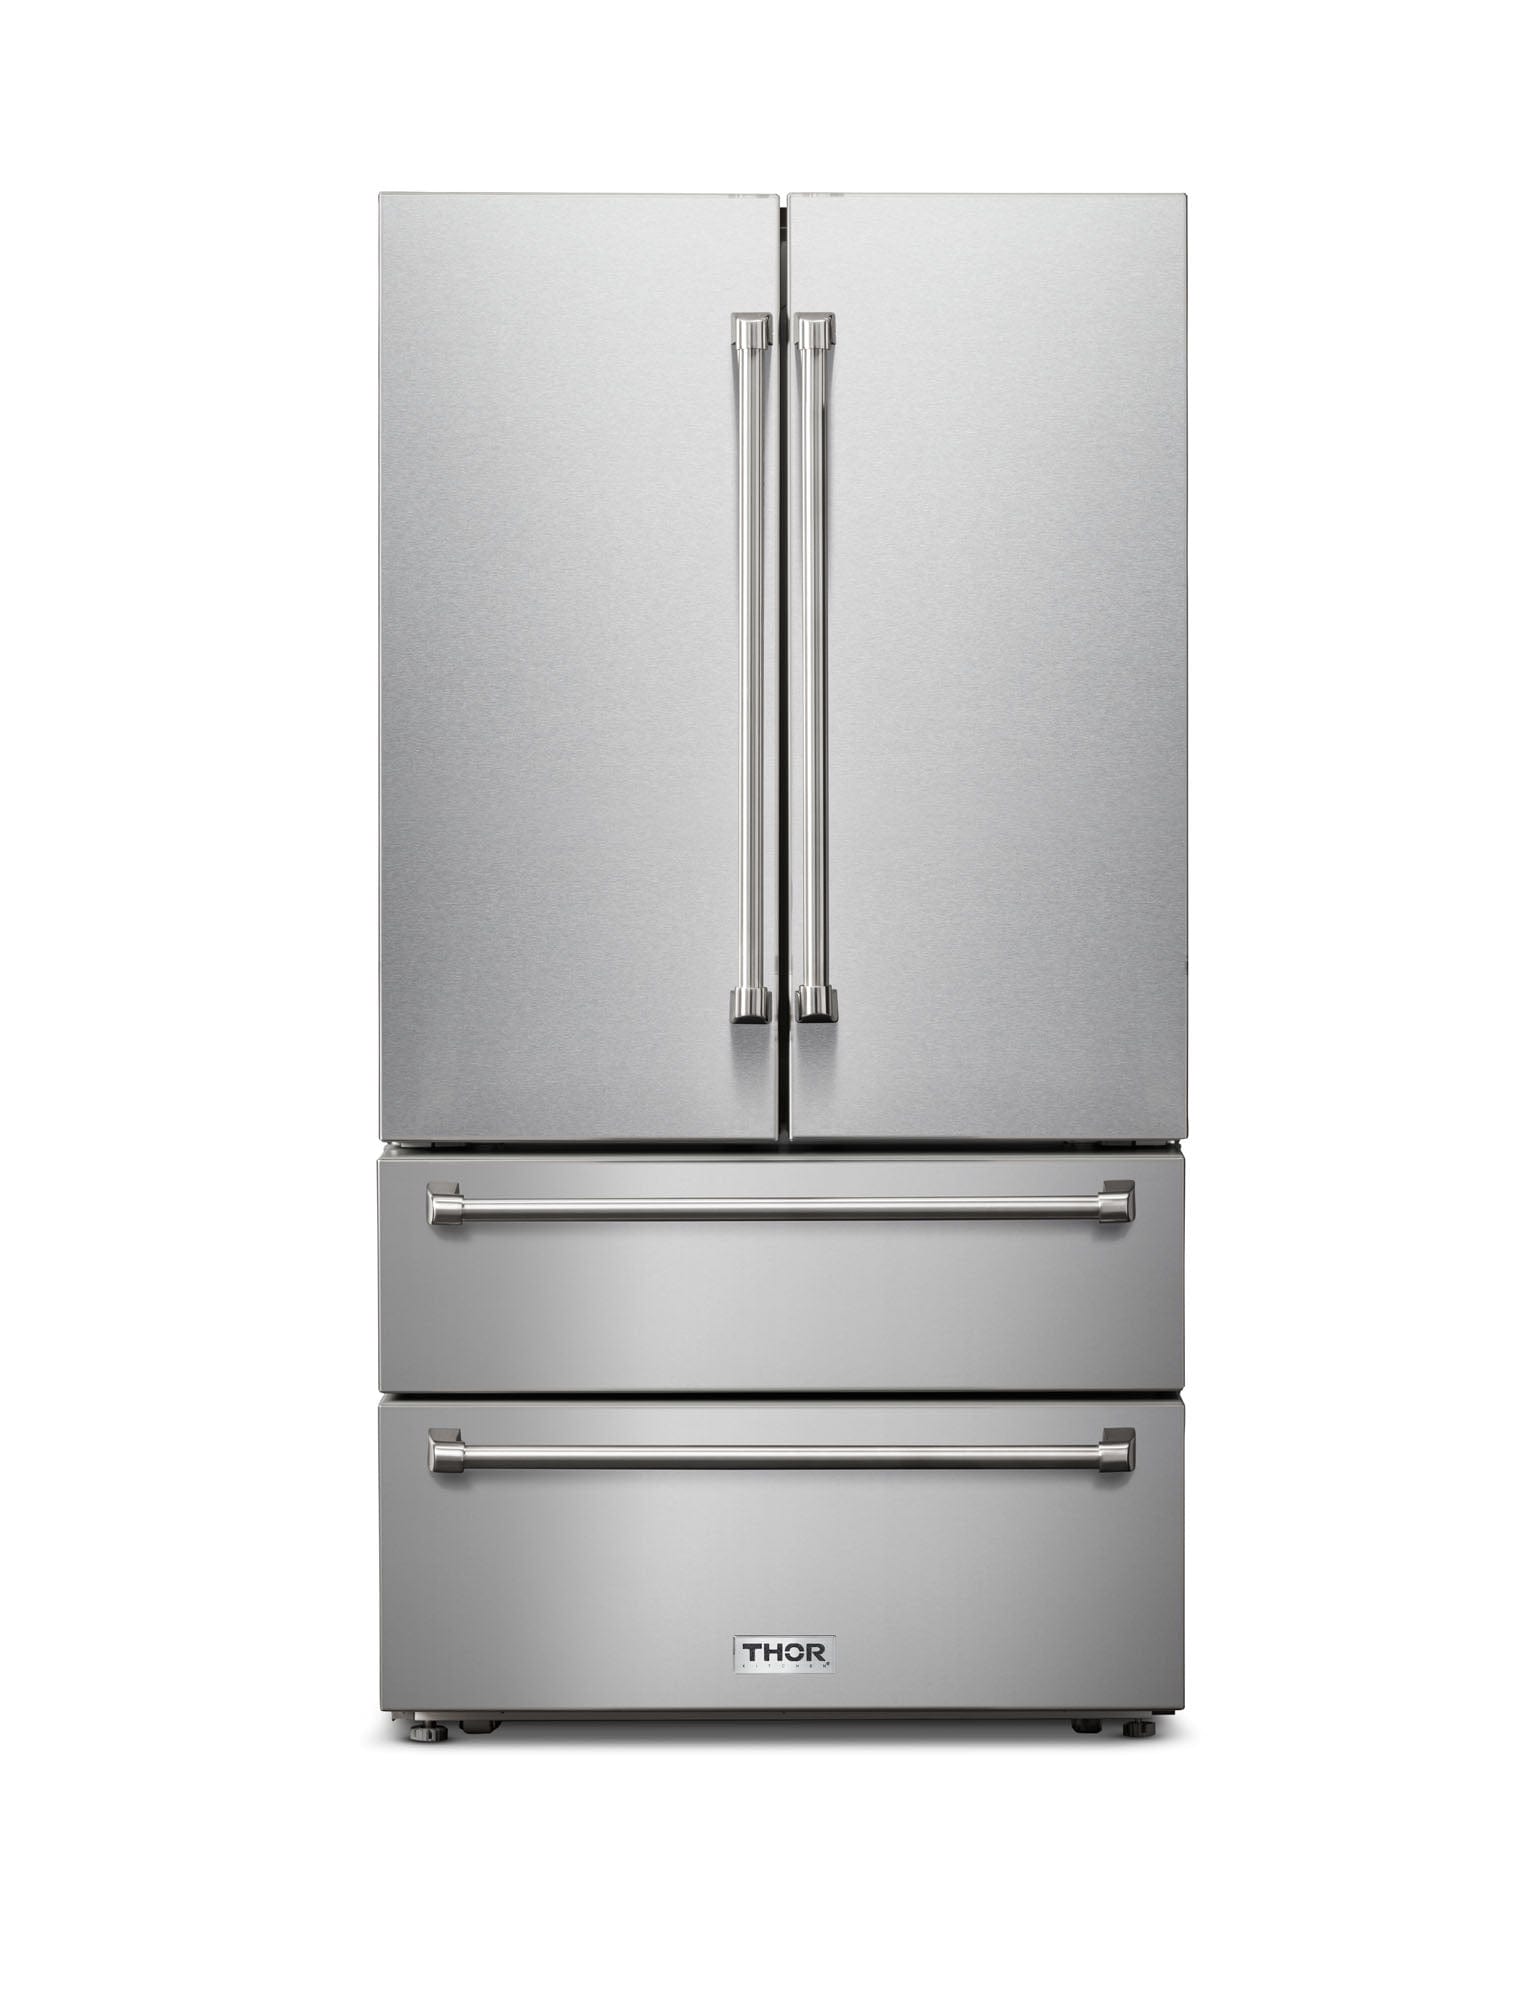 Thor Kitchen 36-Inch 22.5 cu. ft Freestanding French Door Refrigerator with Ice Maker in Stainless Steel (TRF3602) Wine Coolers Empire